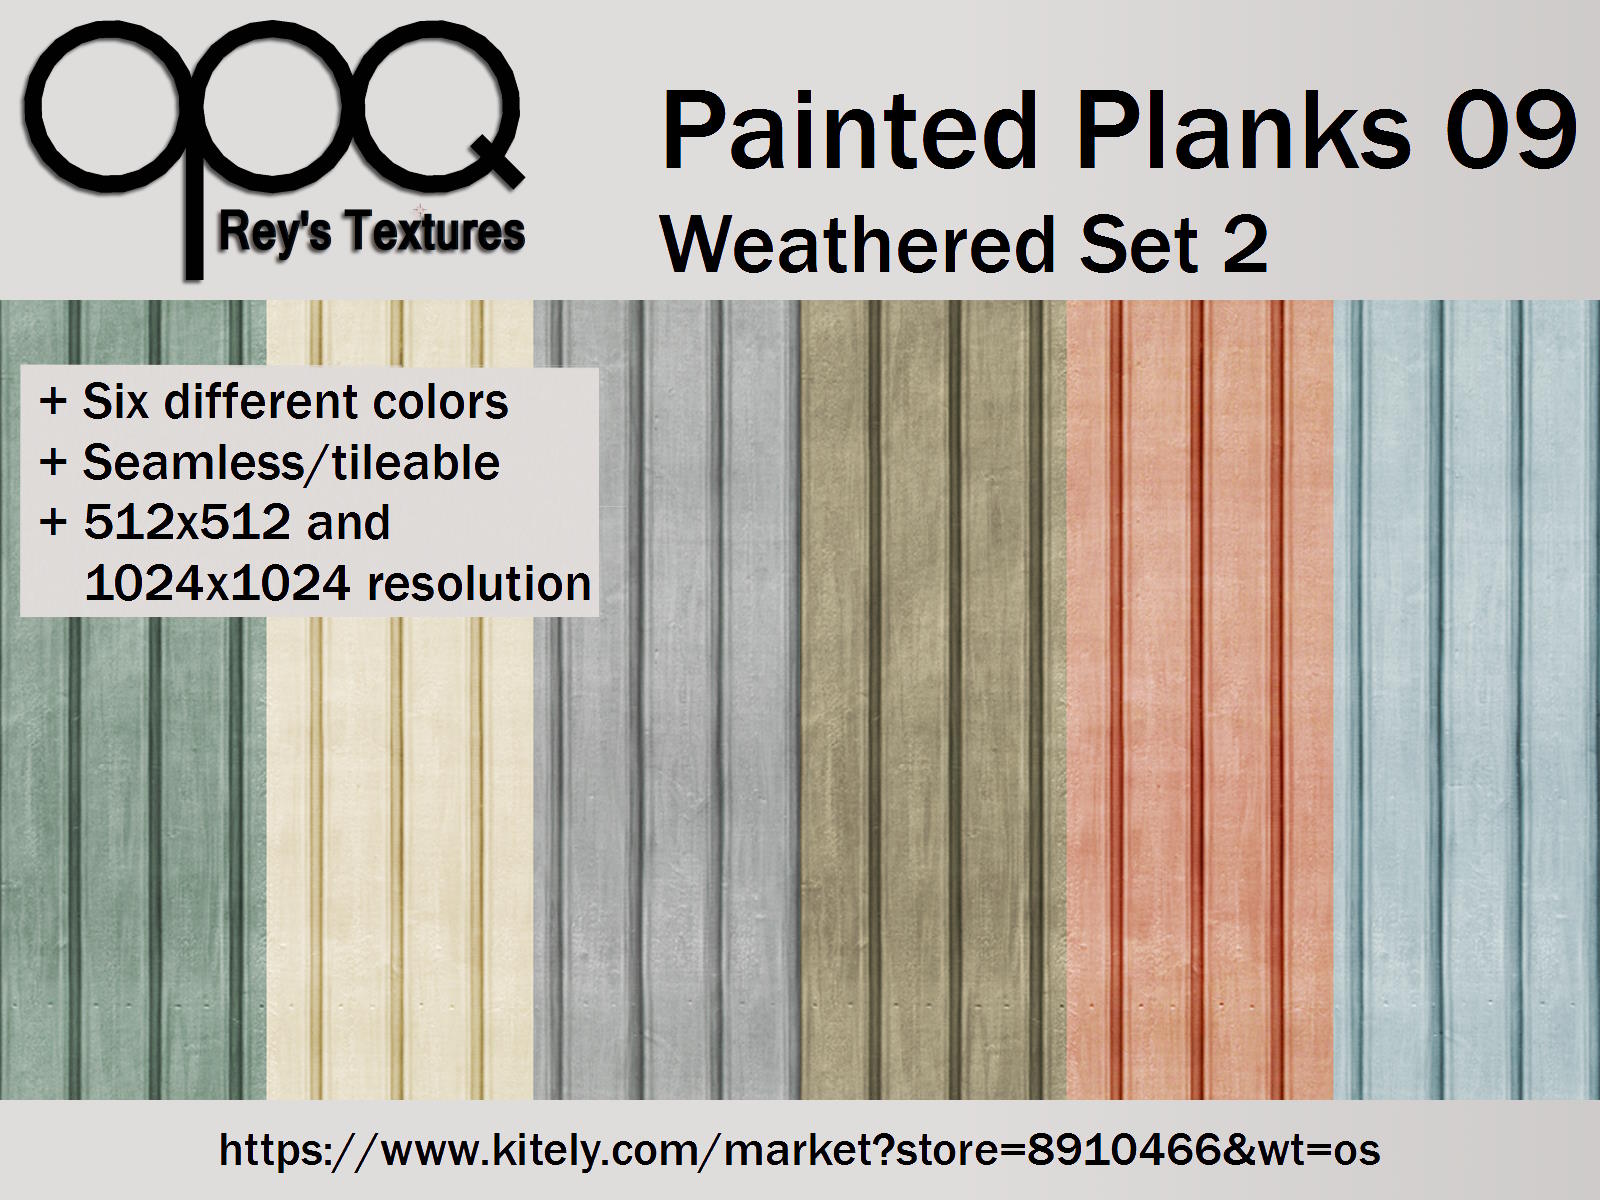 Rey's Painted Planks 09 Weathered Set 2 Poster KM.jpg